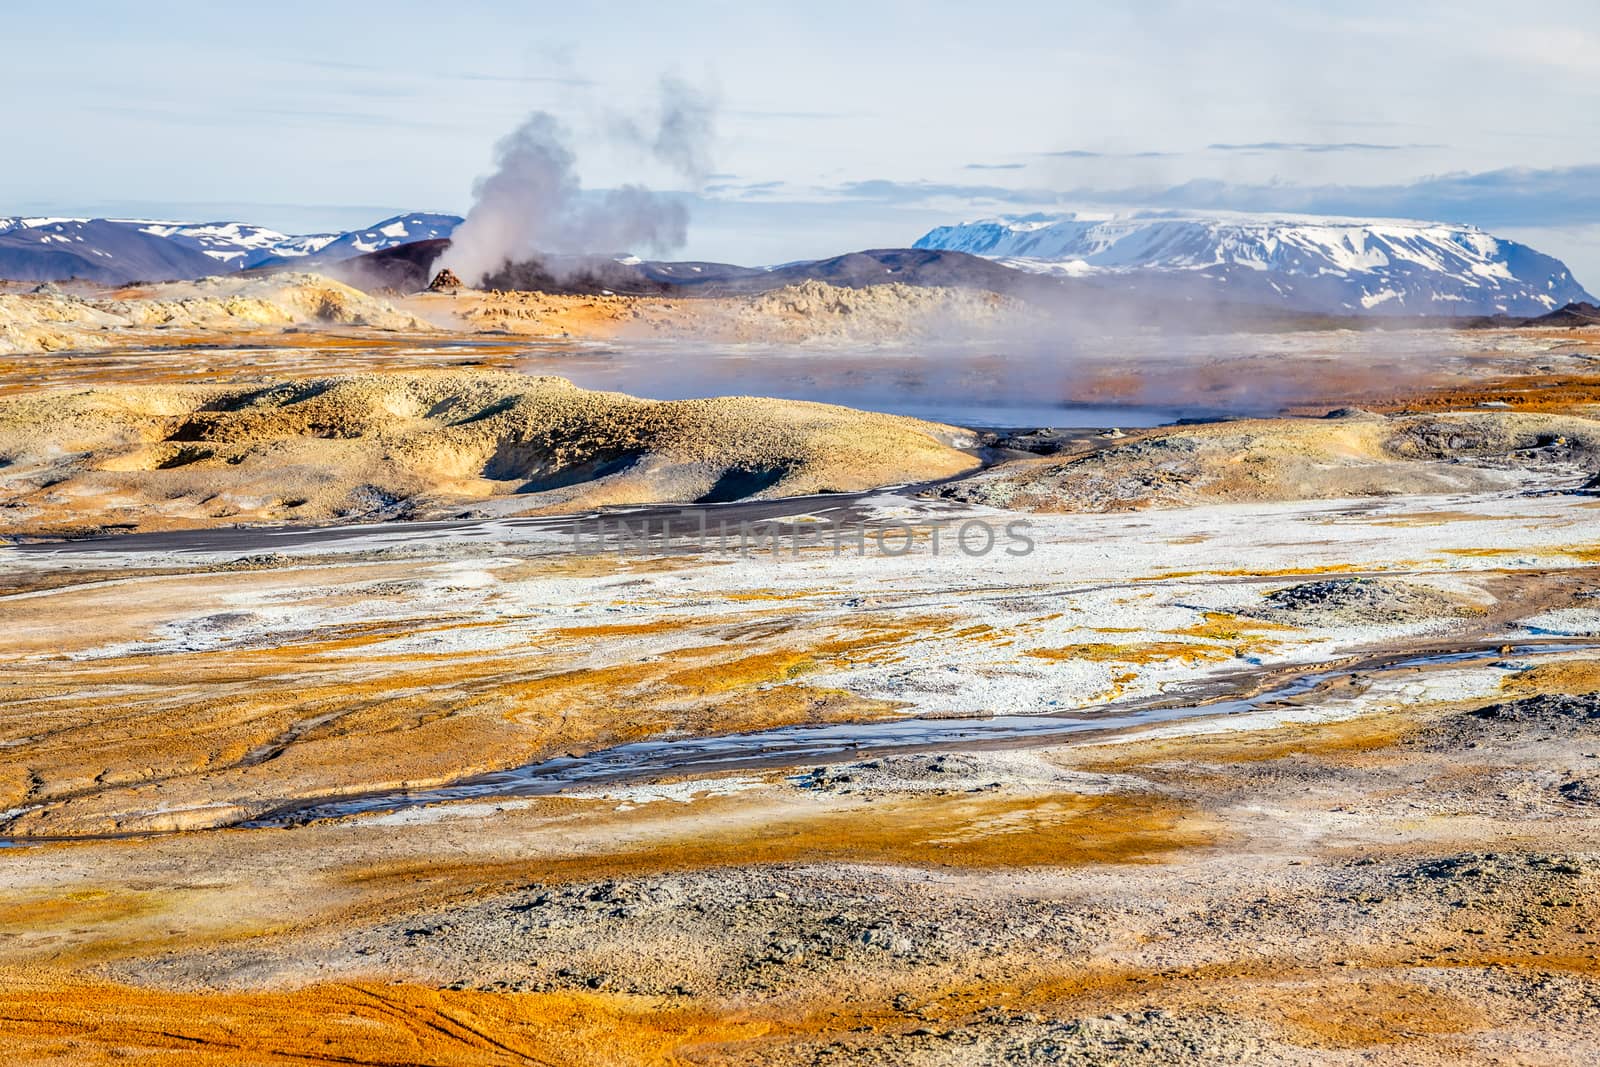 Geothermal field of Hverir, unique wasteland with pools of boili by ambeon